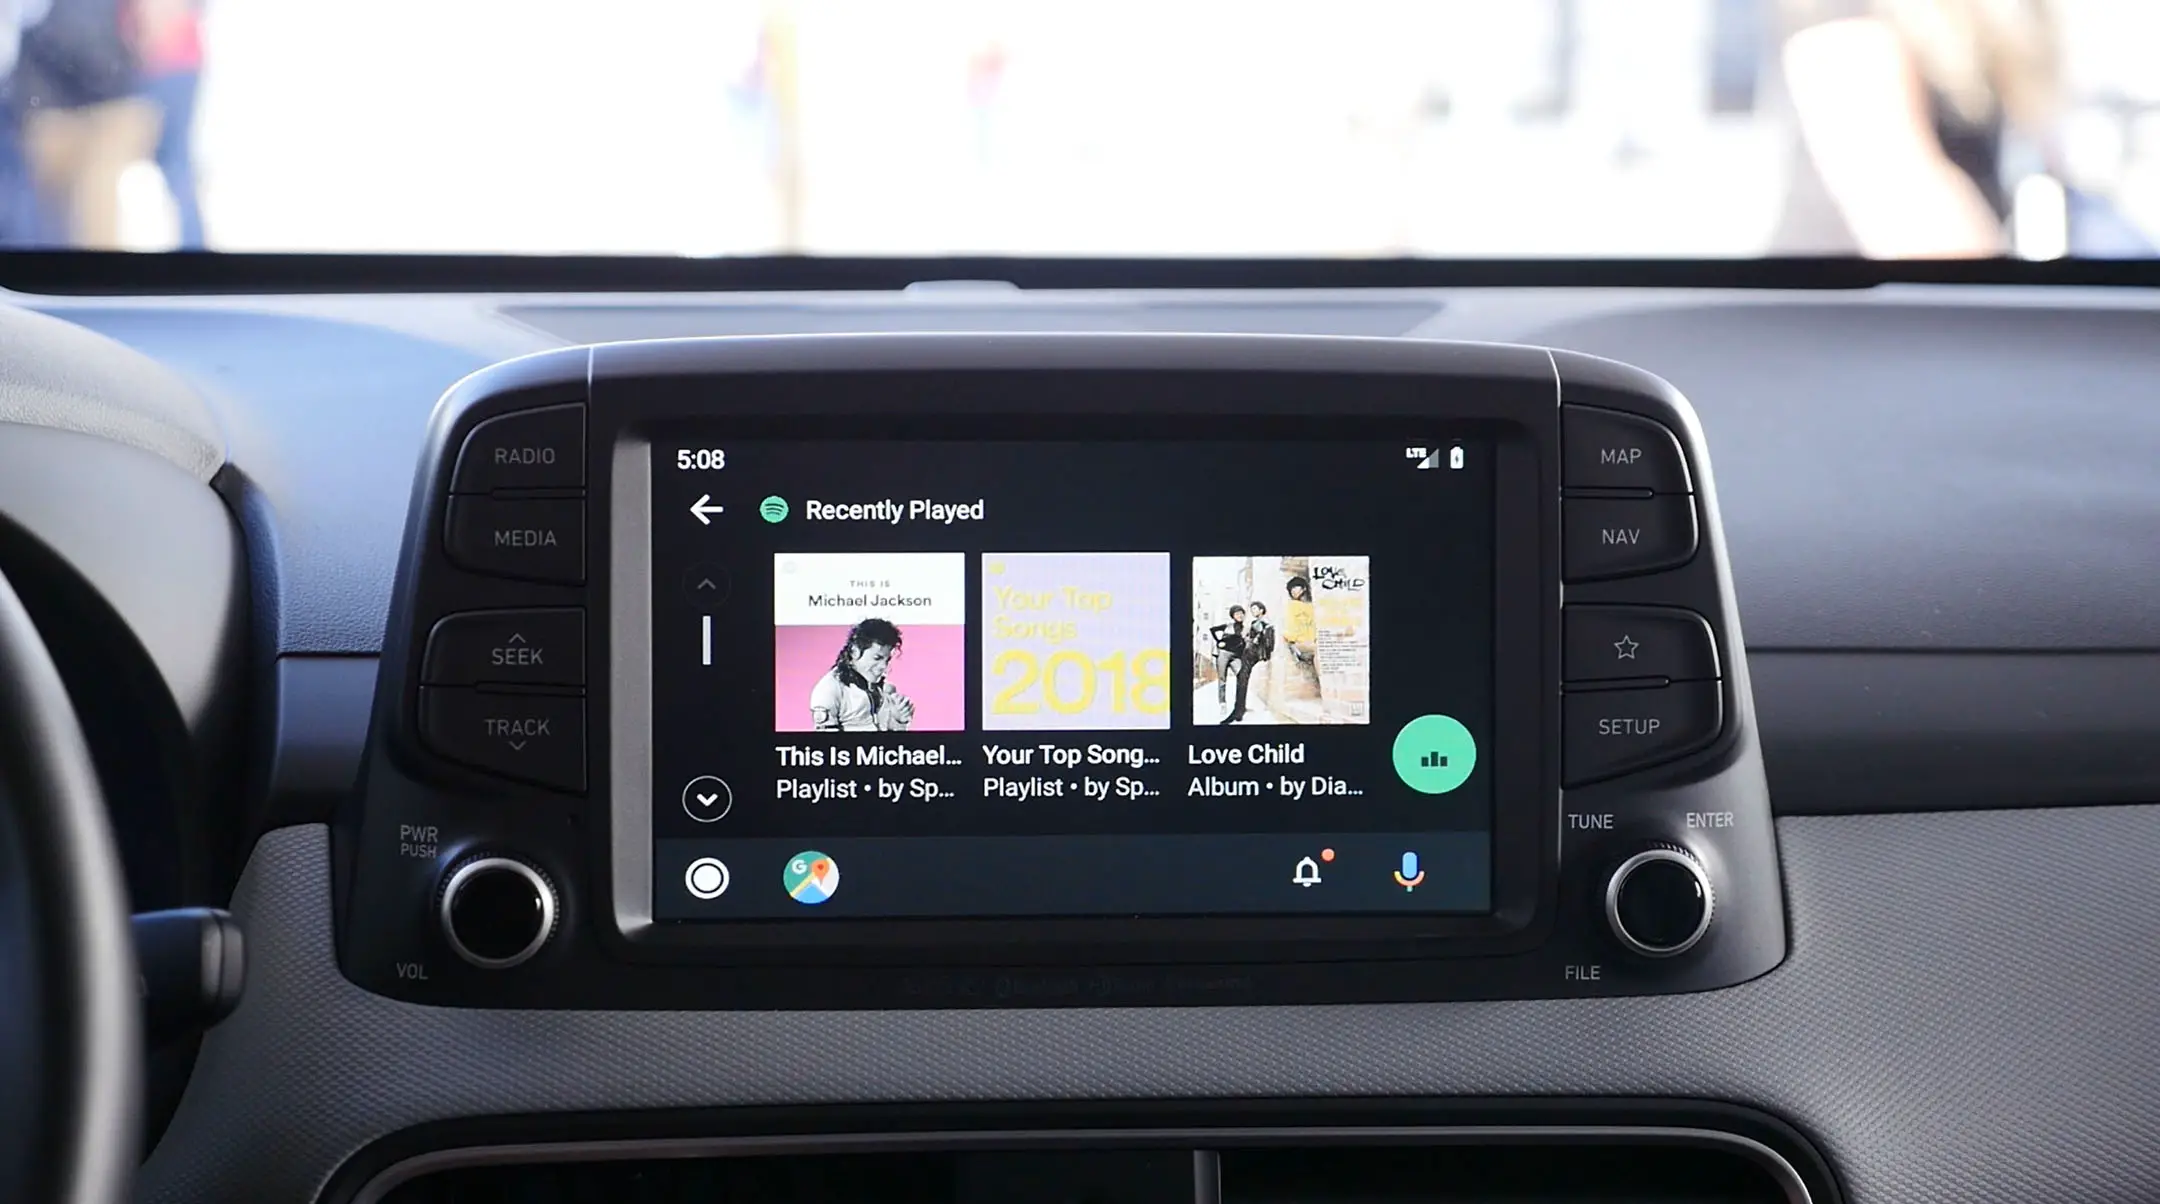 A detailed look at Android Auto's 2019 redesign - Phandroid